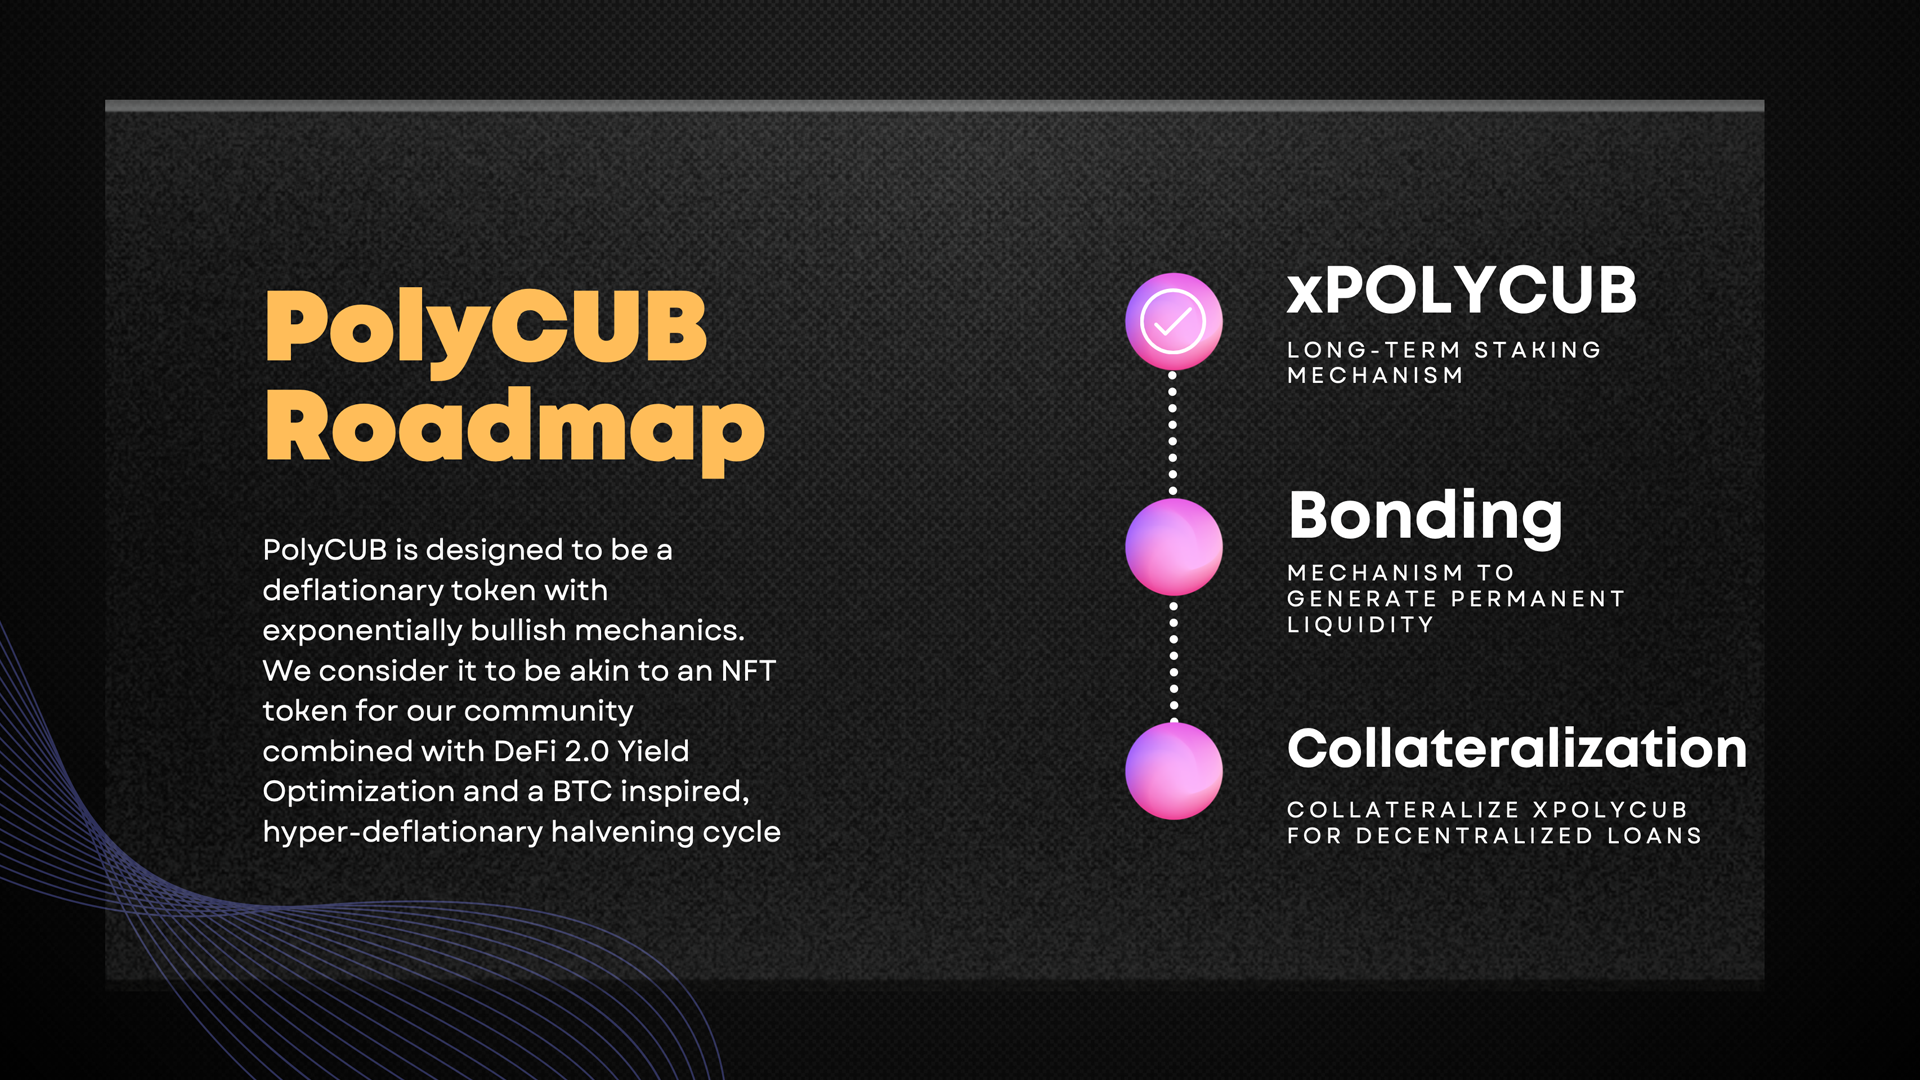 PolyCUB Roadmap  xPOLYCUB, Bonding and Collateralized Lending.png